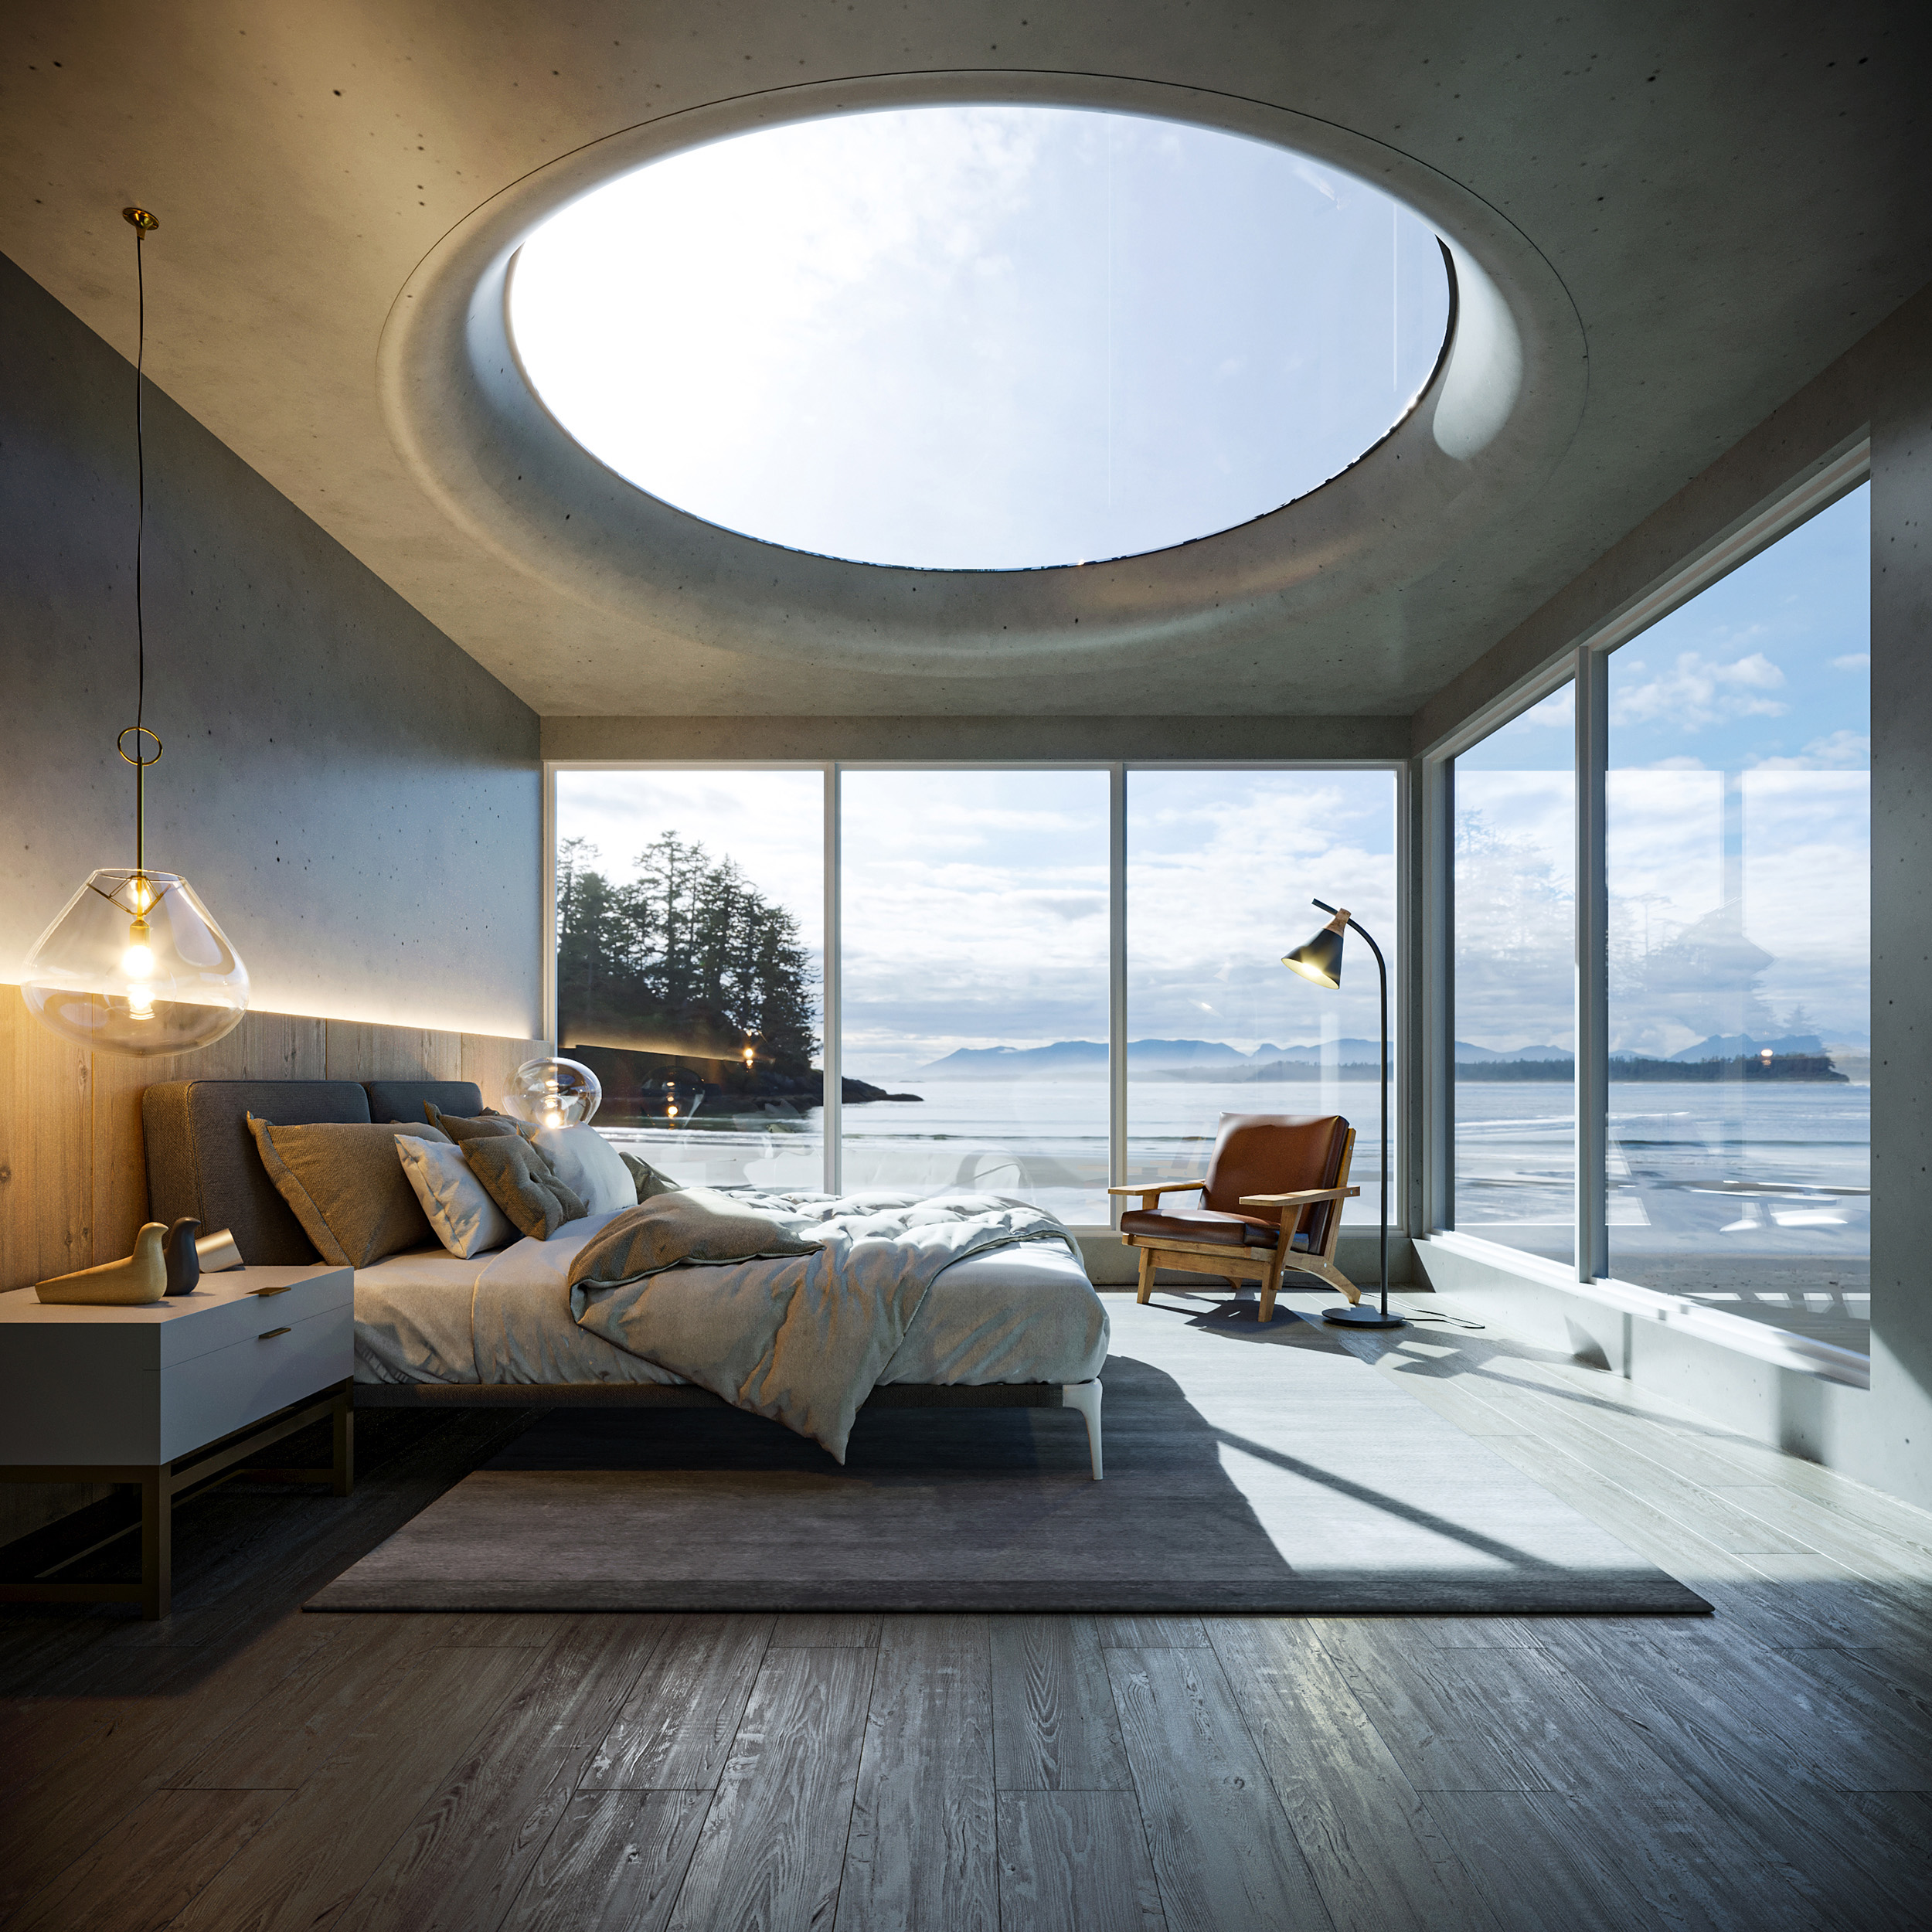 Personal work - Bedroom with lake view